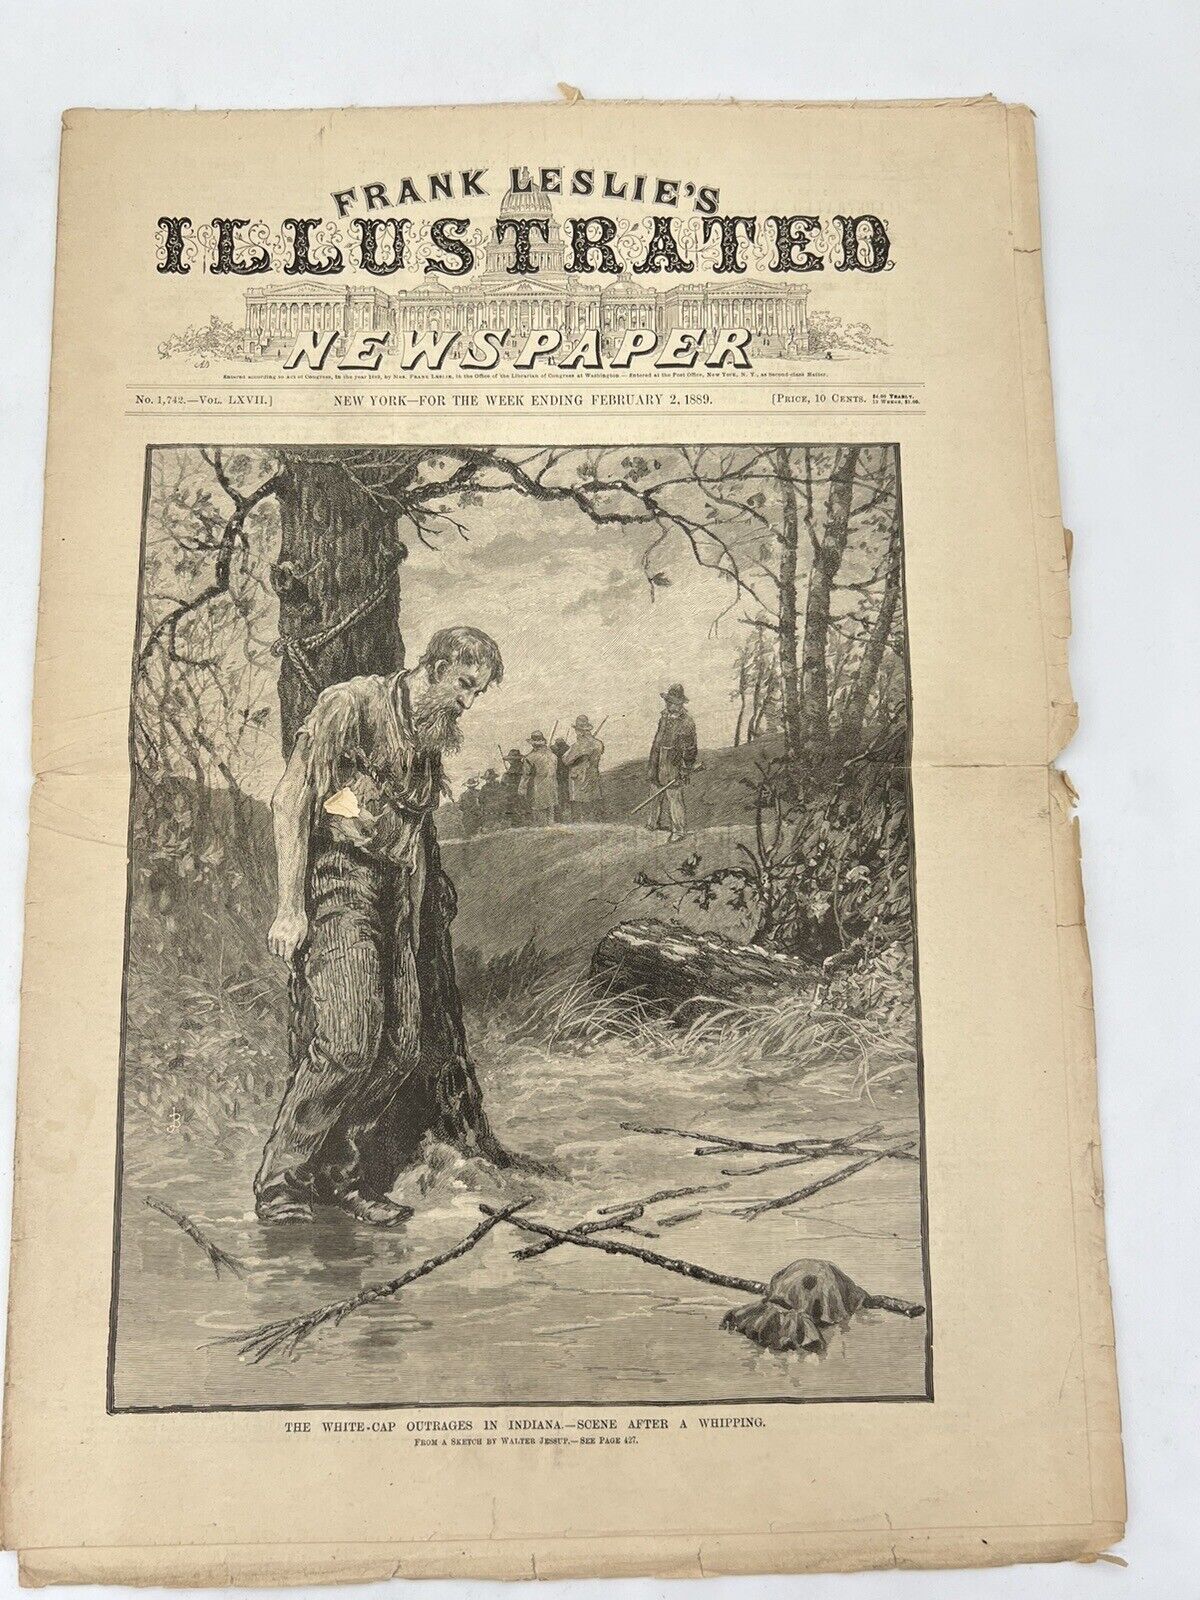 Frank Leslie’s Illustrated Newspaper- 2/2/1889 - White Cap Whippings Indiana